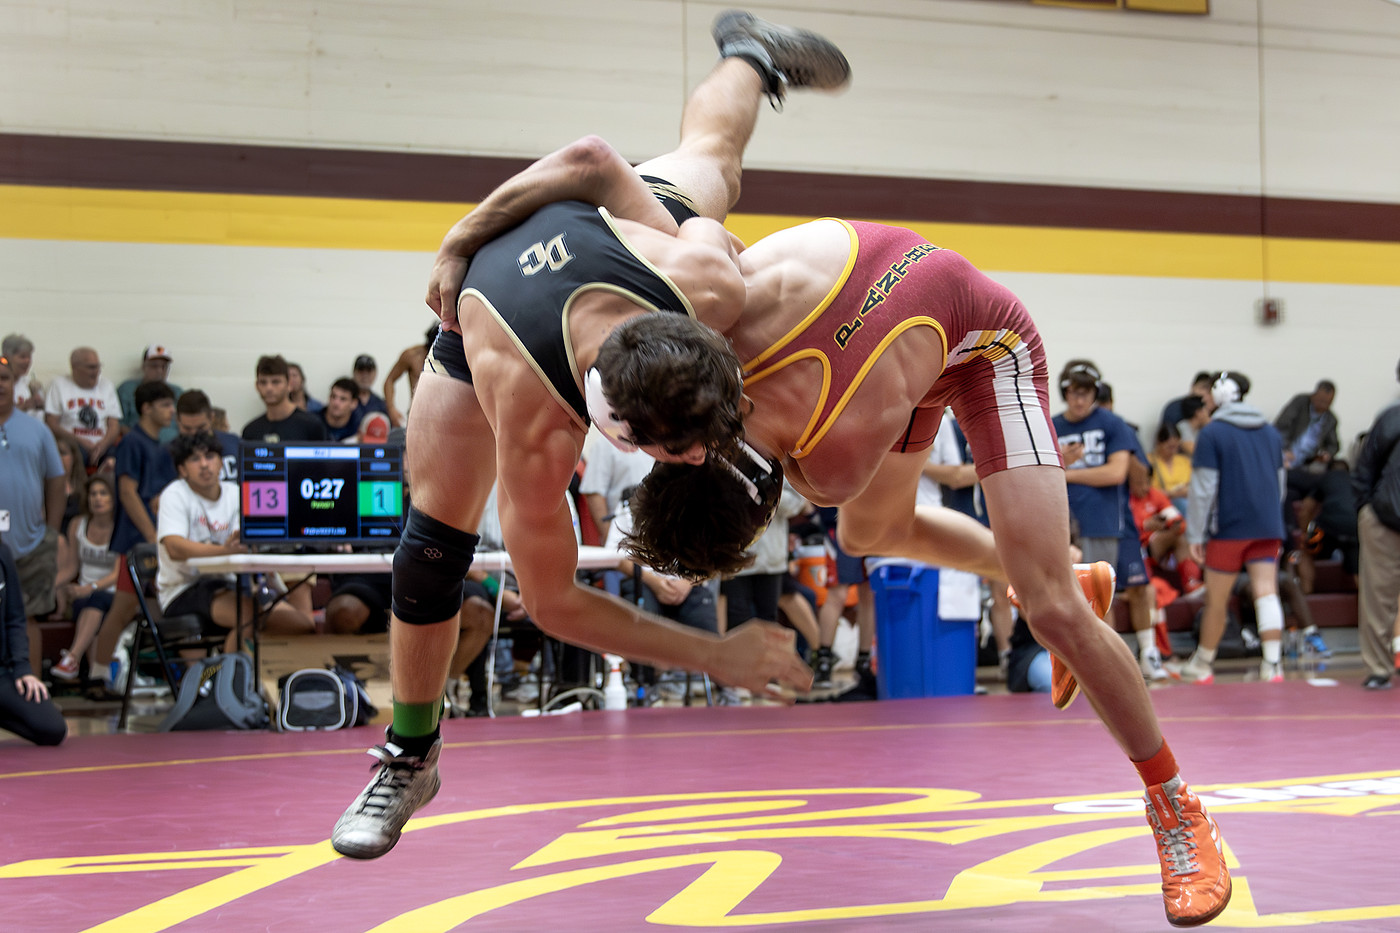 The Panthers lose their dual to Modesto 28-26; Lewis and Chavez-Morales both record WBFs